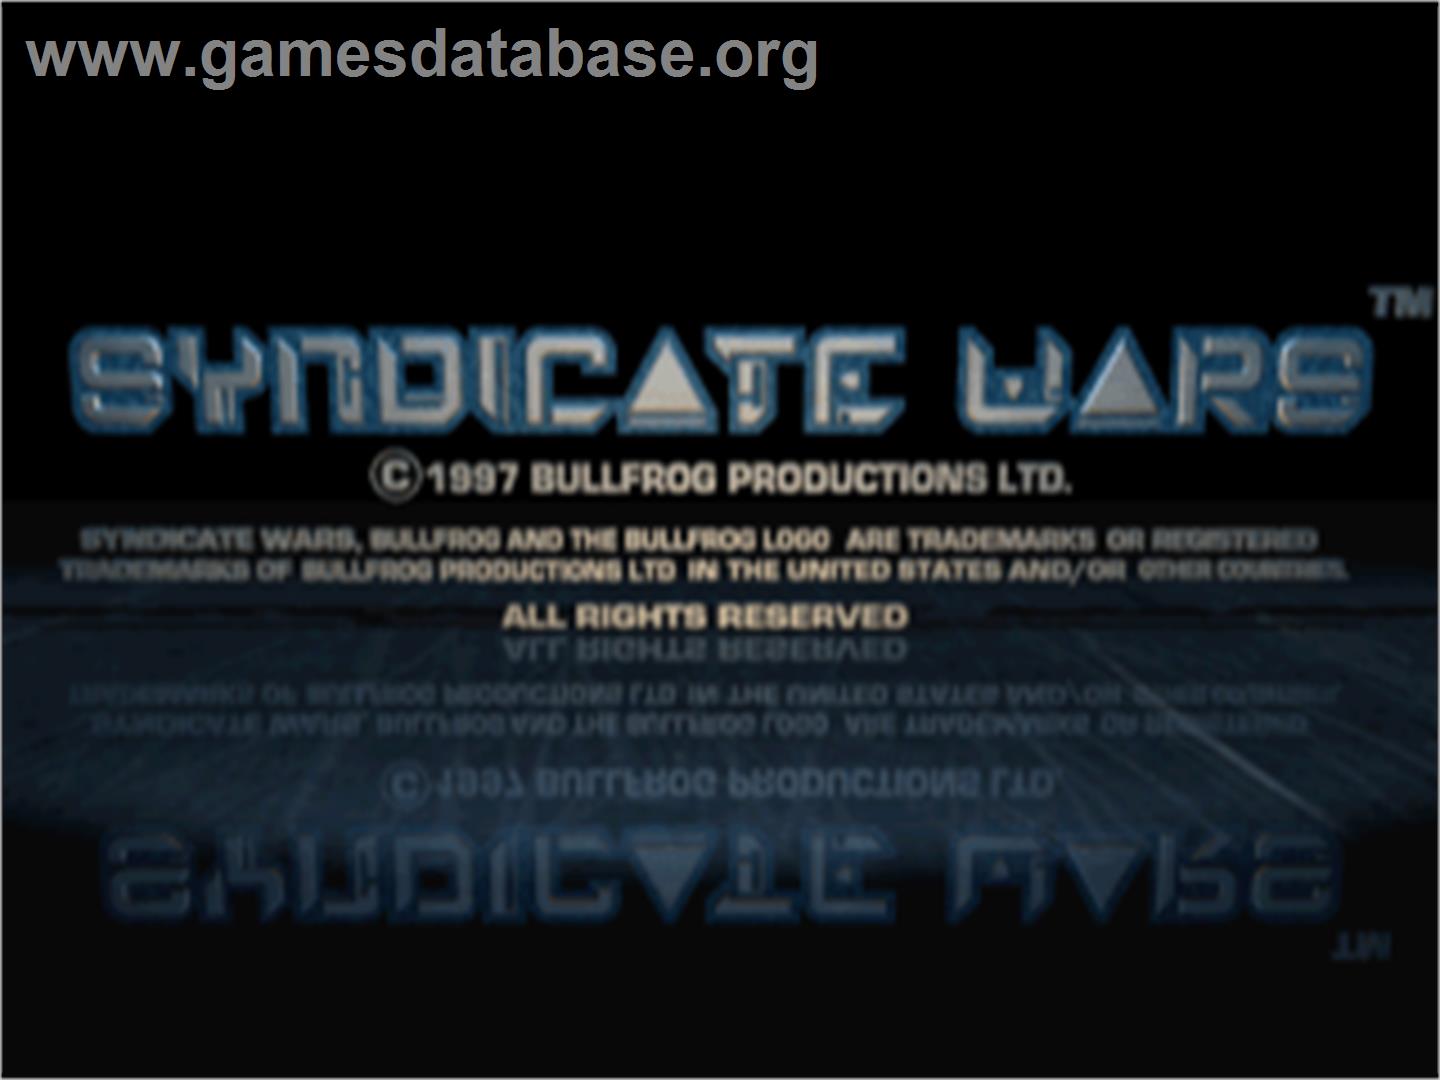 Syndicate Wars - Sony Playstation - Artwork - Title Screen